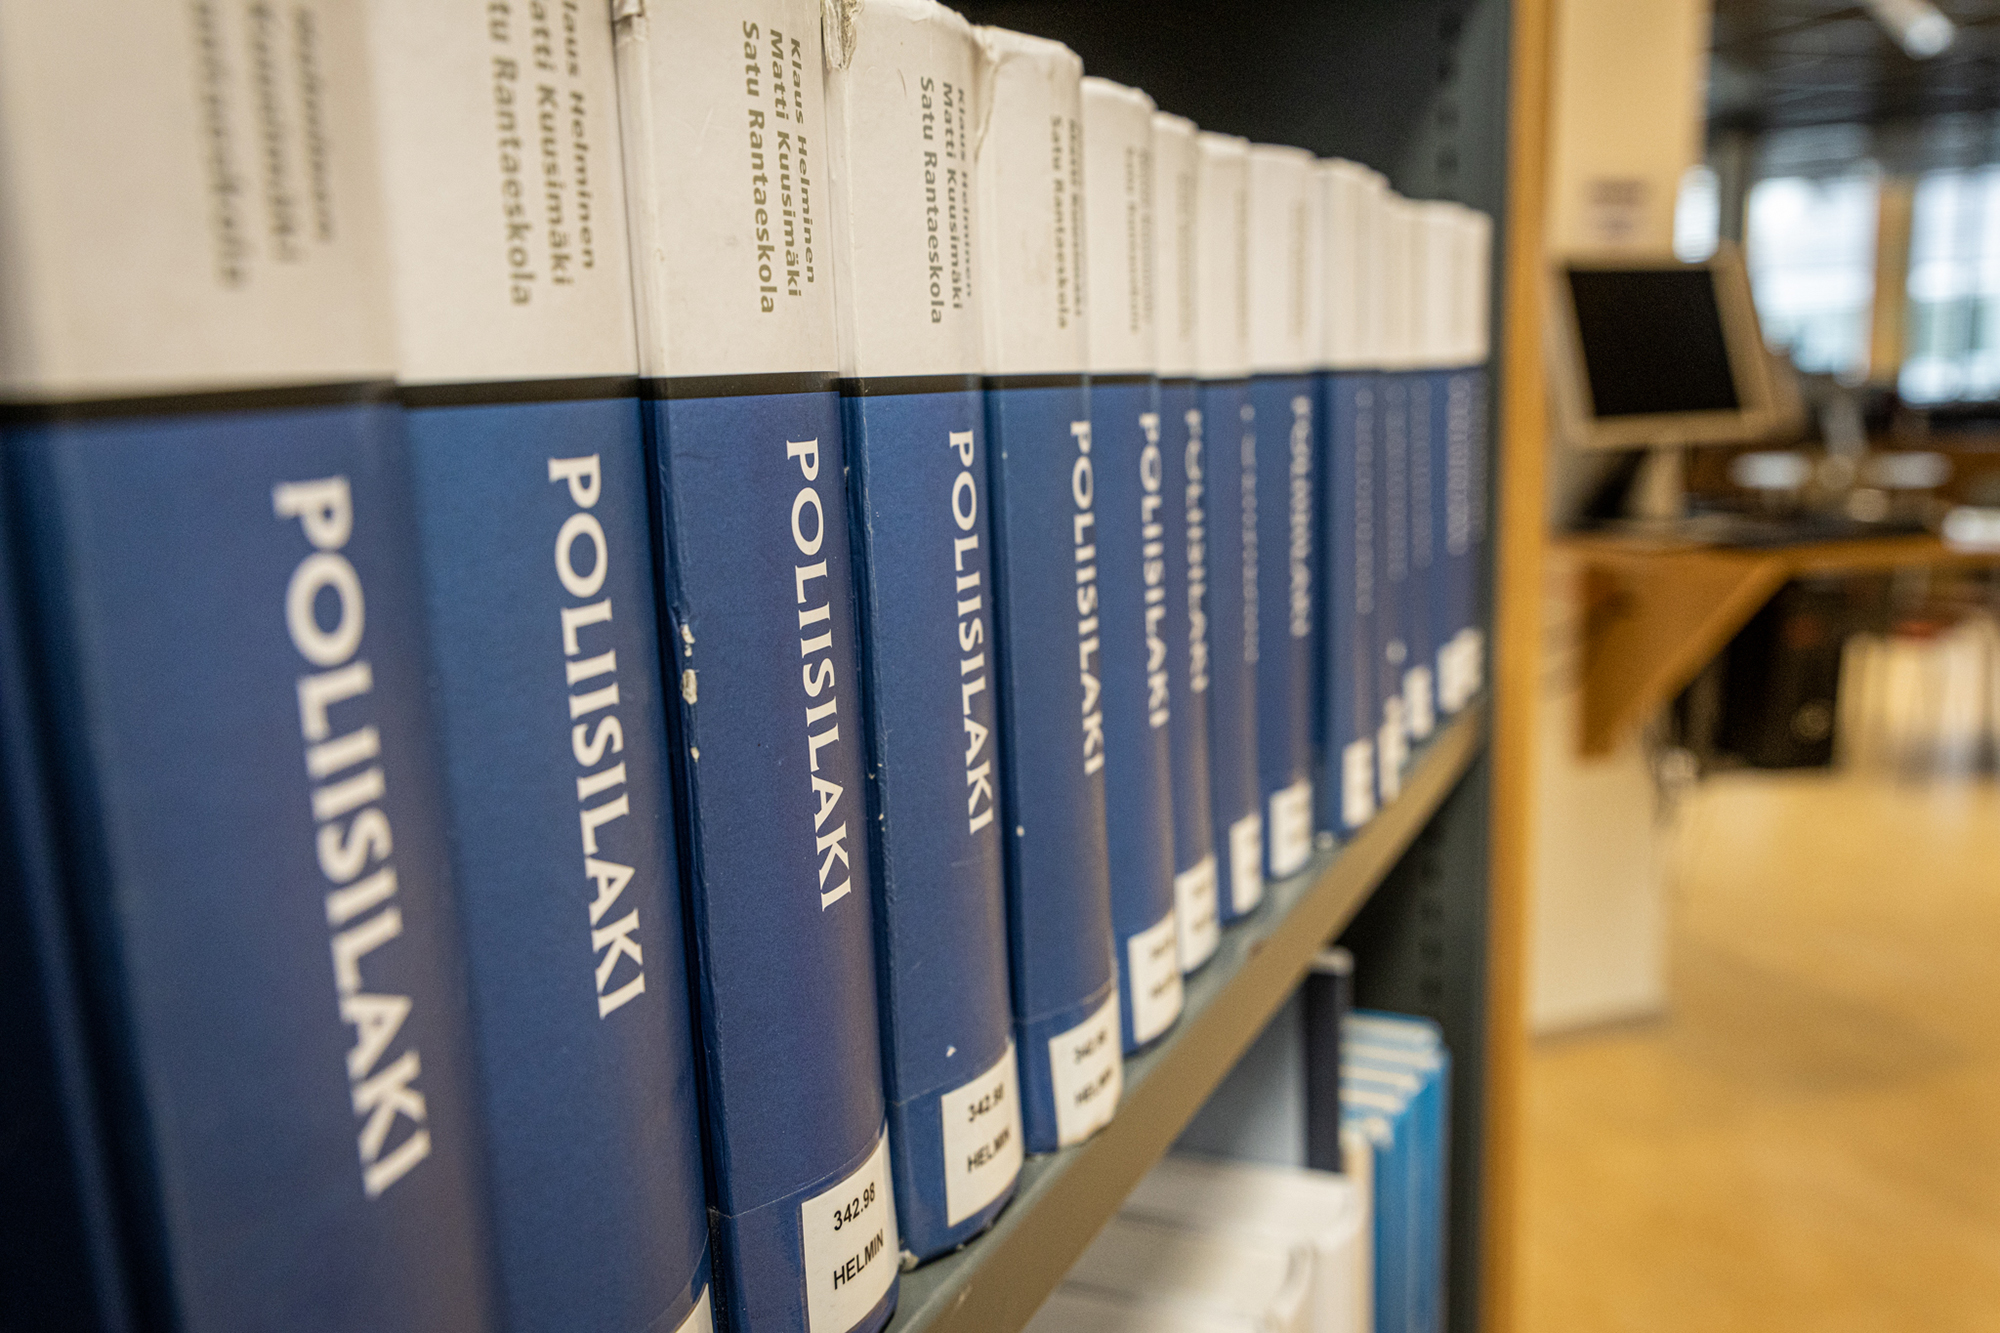 Copies of the Police Act on the shelf of the Police University library.